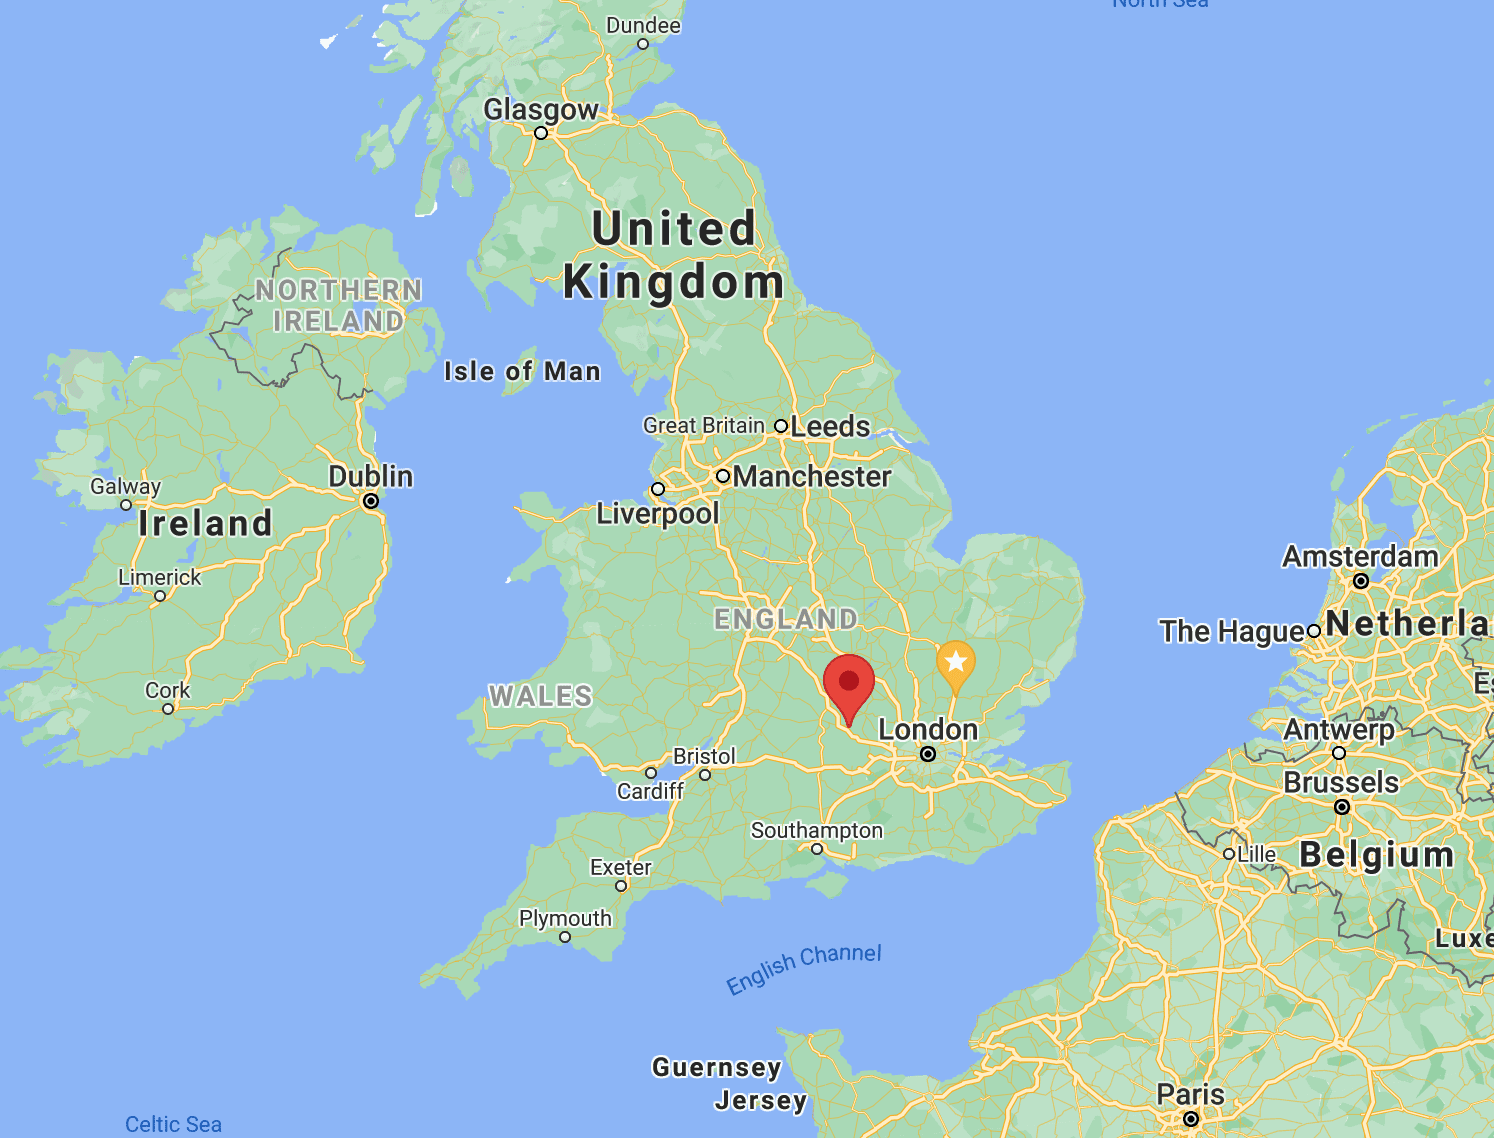 UK Map with red location marker for Thame, Oxfordshire which has the base of OISA